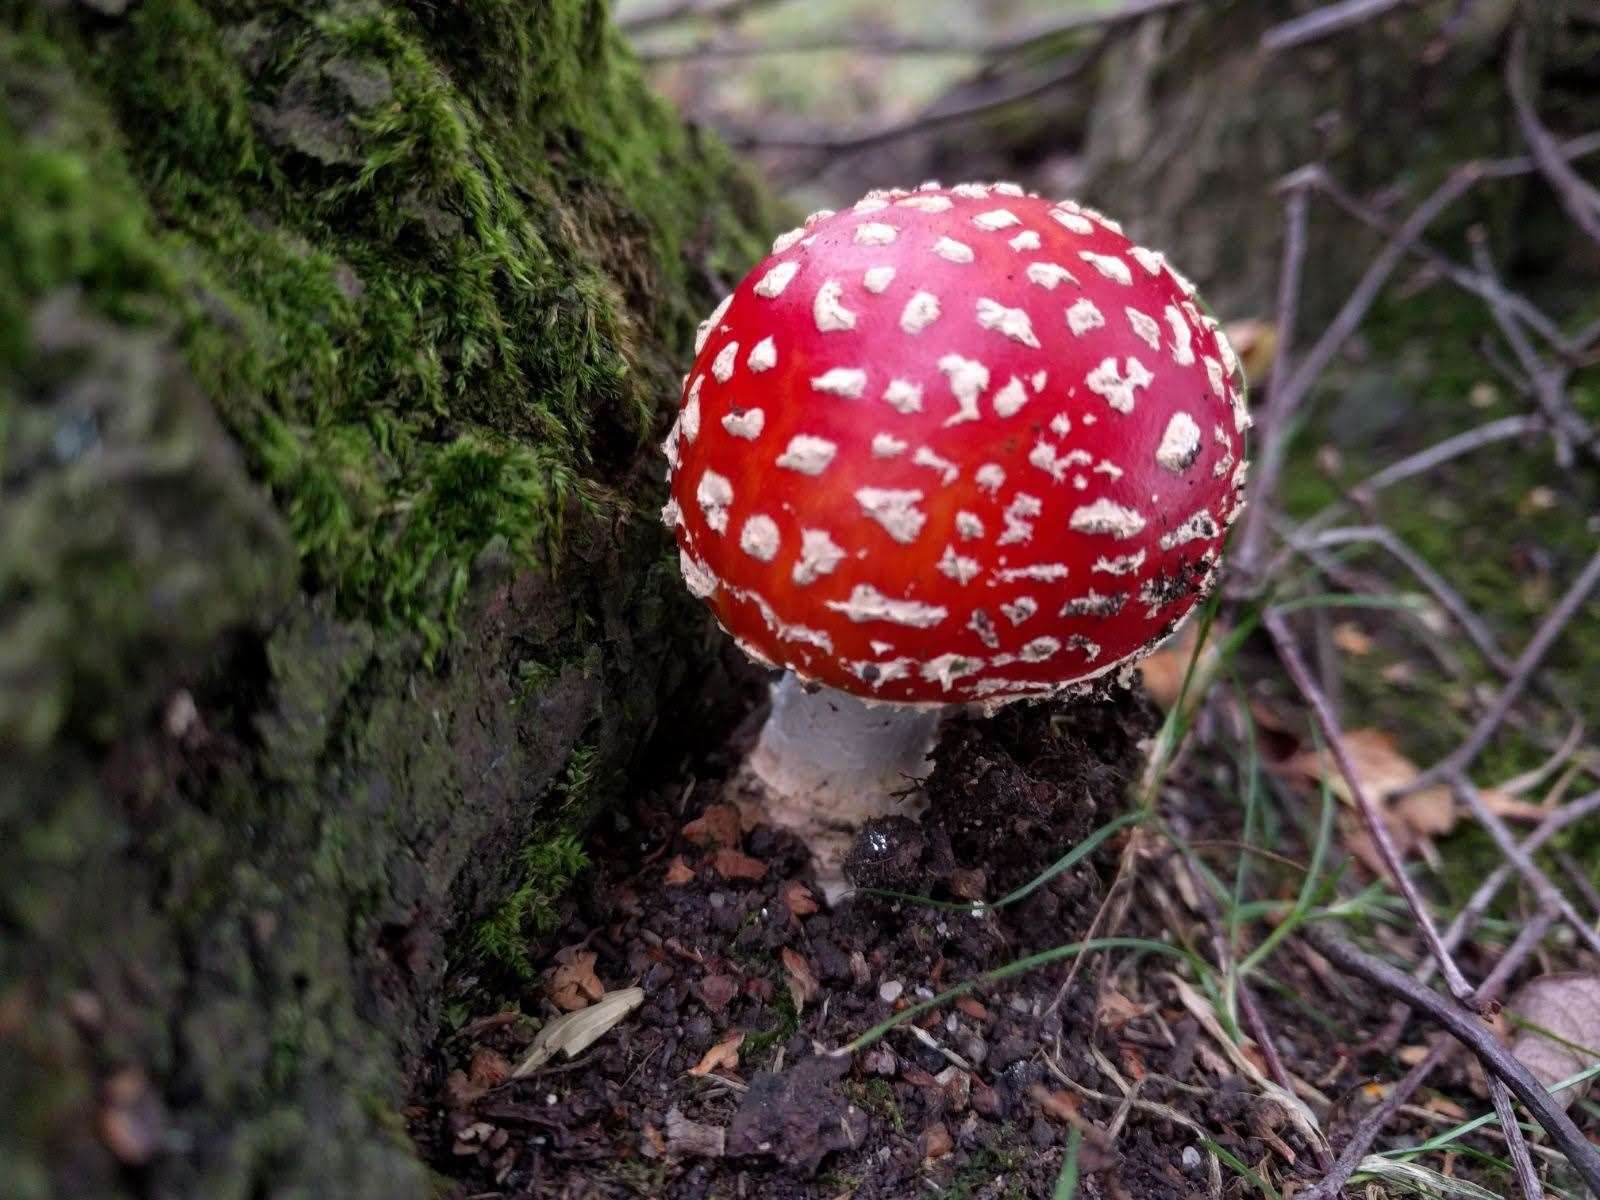 Only the fruiting body of fungi is visible above ground, which exists to spread its spores, while vast underground networks connect with other plant life (handout/University of Sheffield/PA)